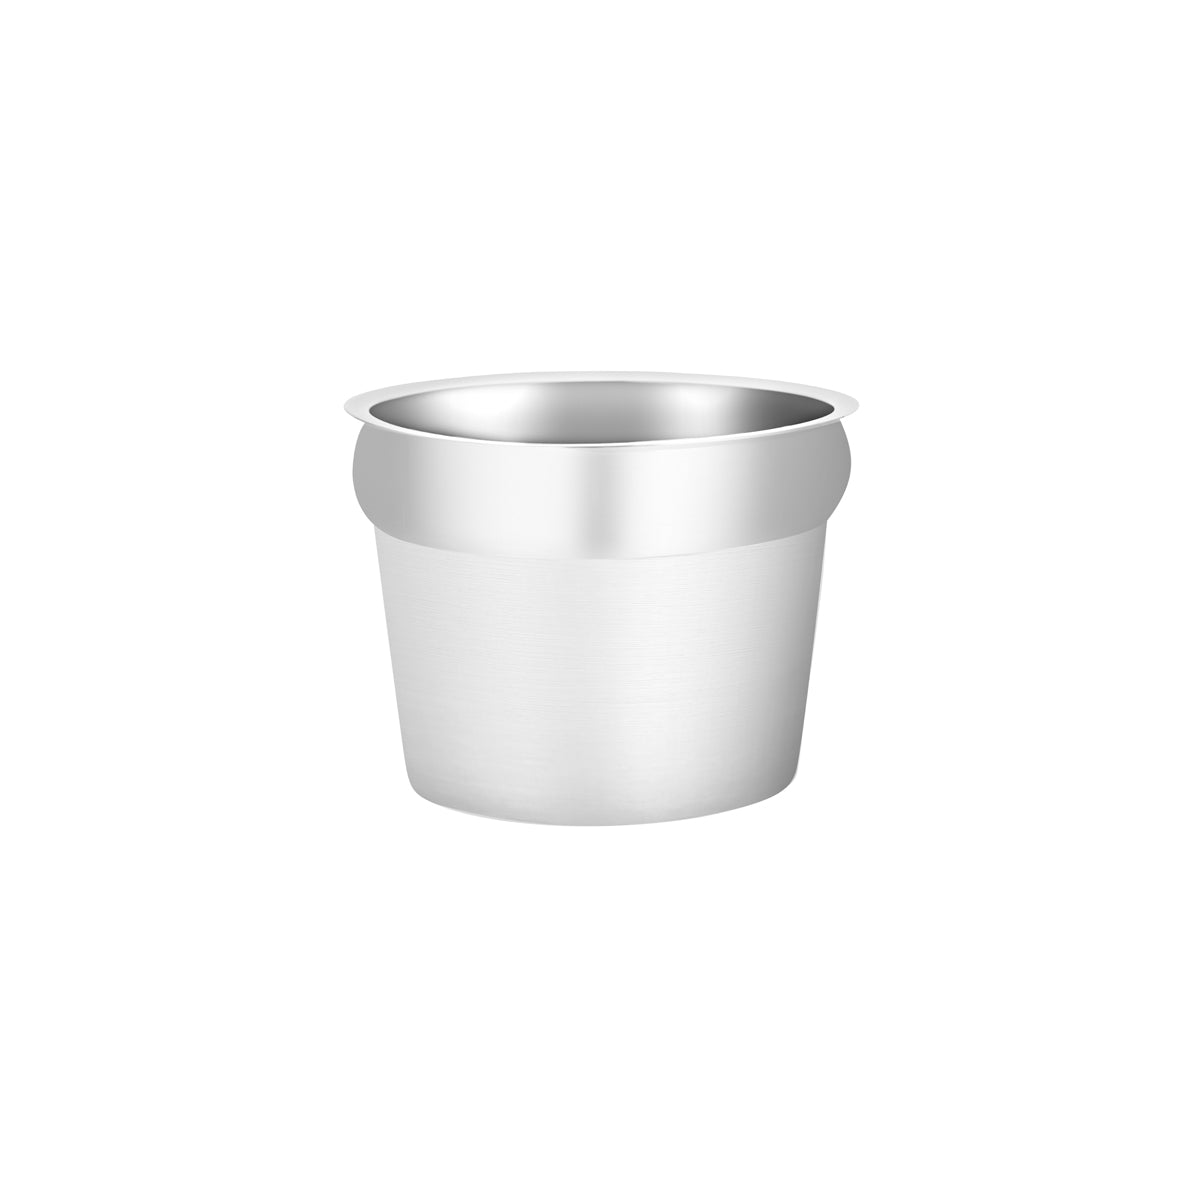 54929-I Chef Inox Soup Pan Insert Round Stainless Steel to Suit 54929 Tomkin Australia Hospitality Supplies